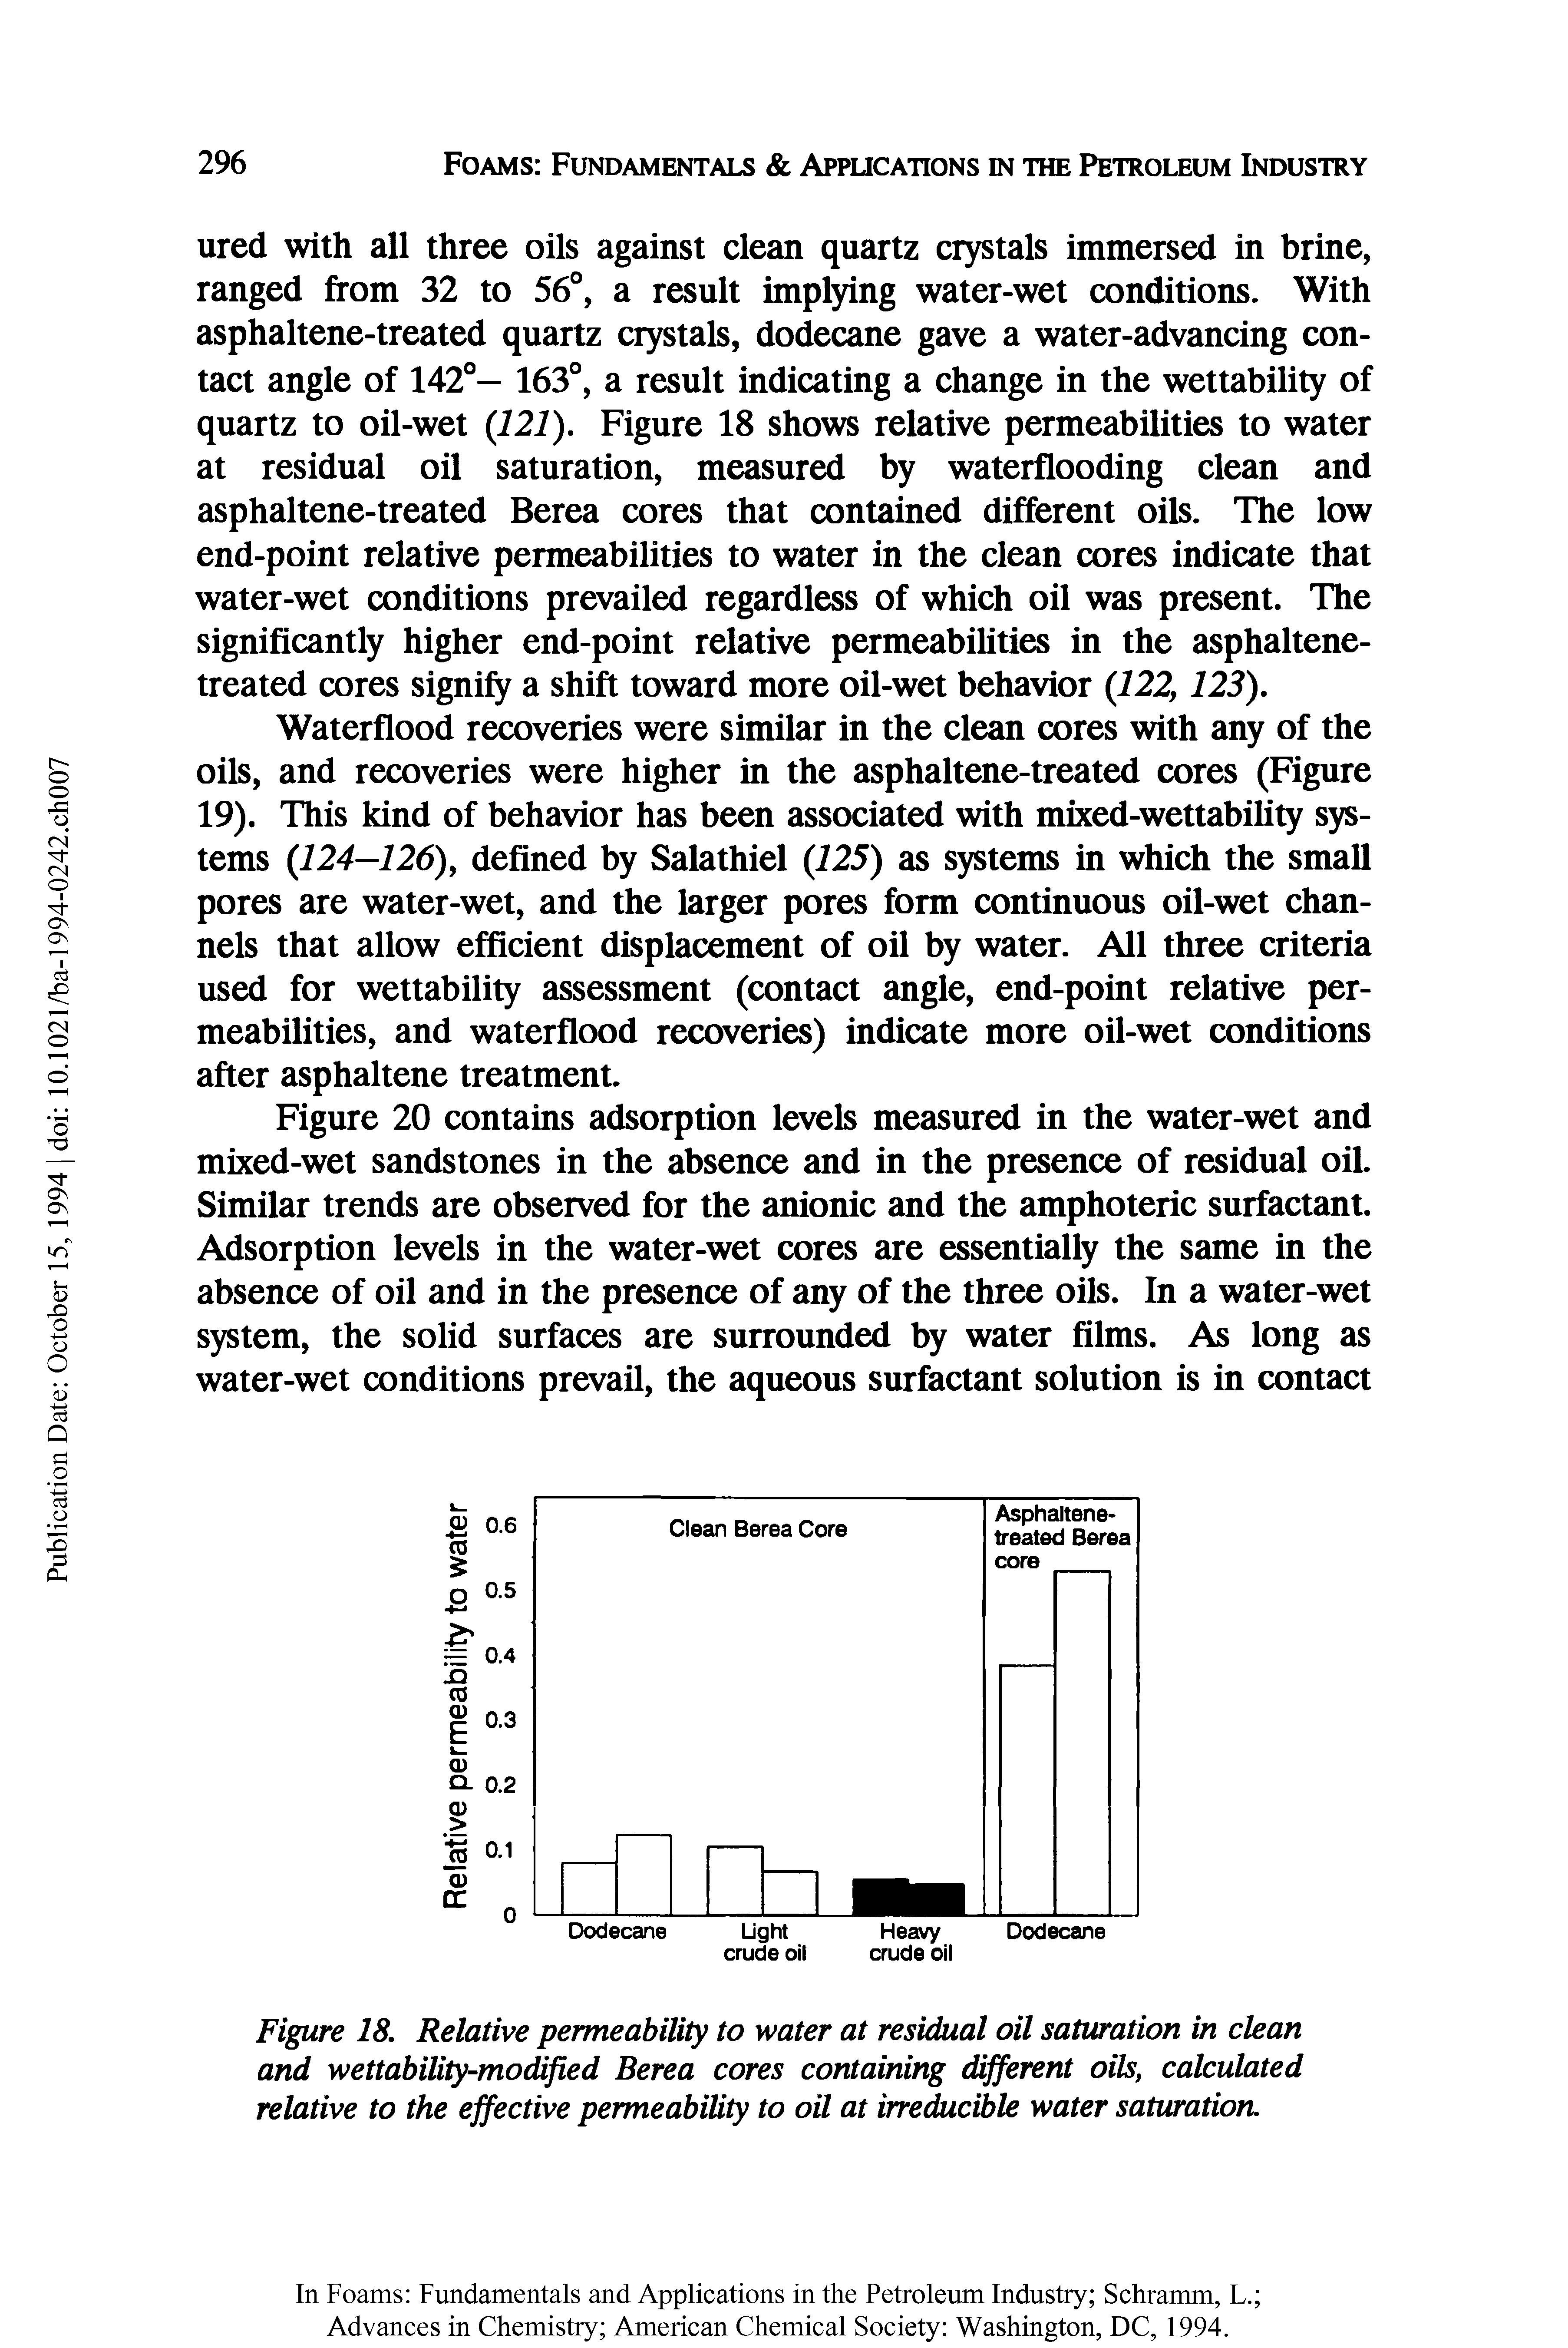 Figure 18. Relative permeability to water at residual oil saturation in clean and wettability-modified Berea cores containing different oils, calculated relative to the effective permeability to oil at irreducible water saturation.